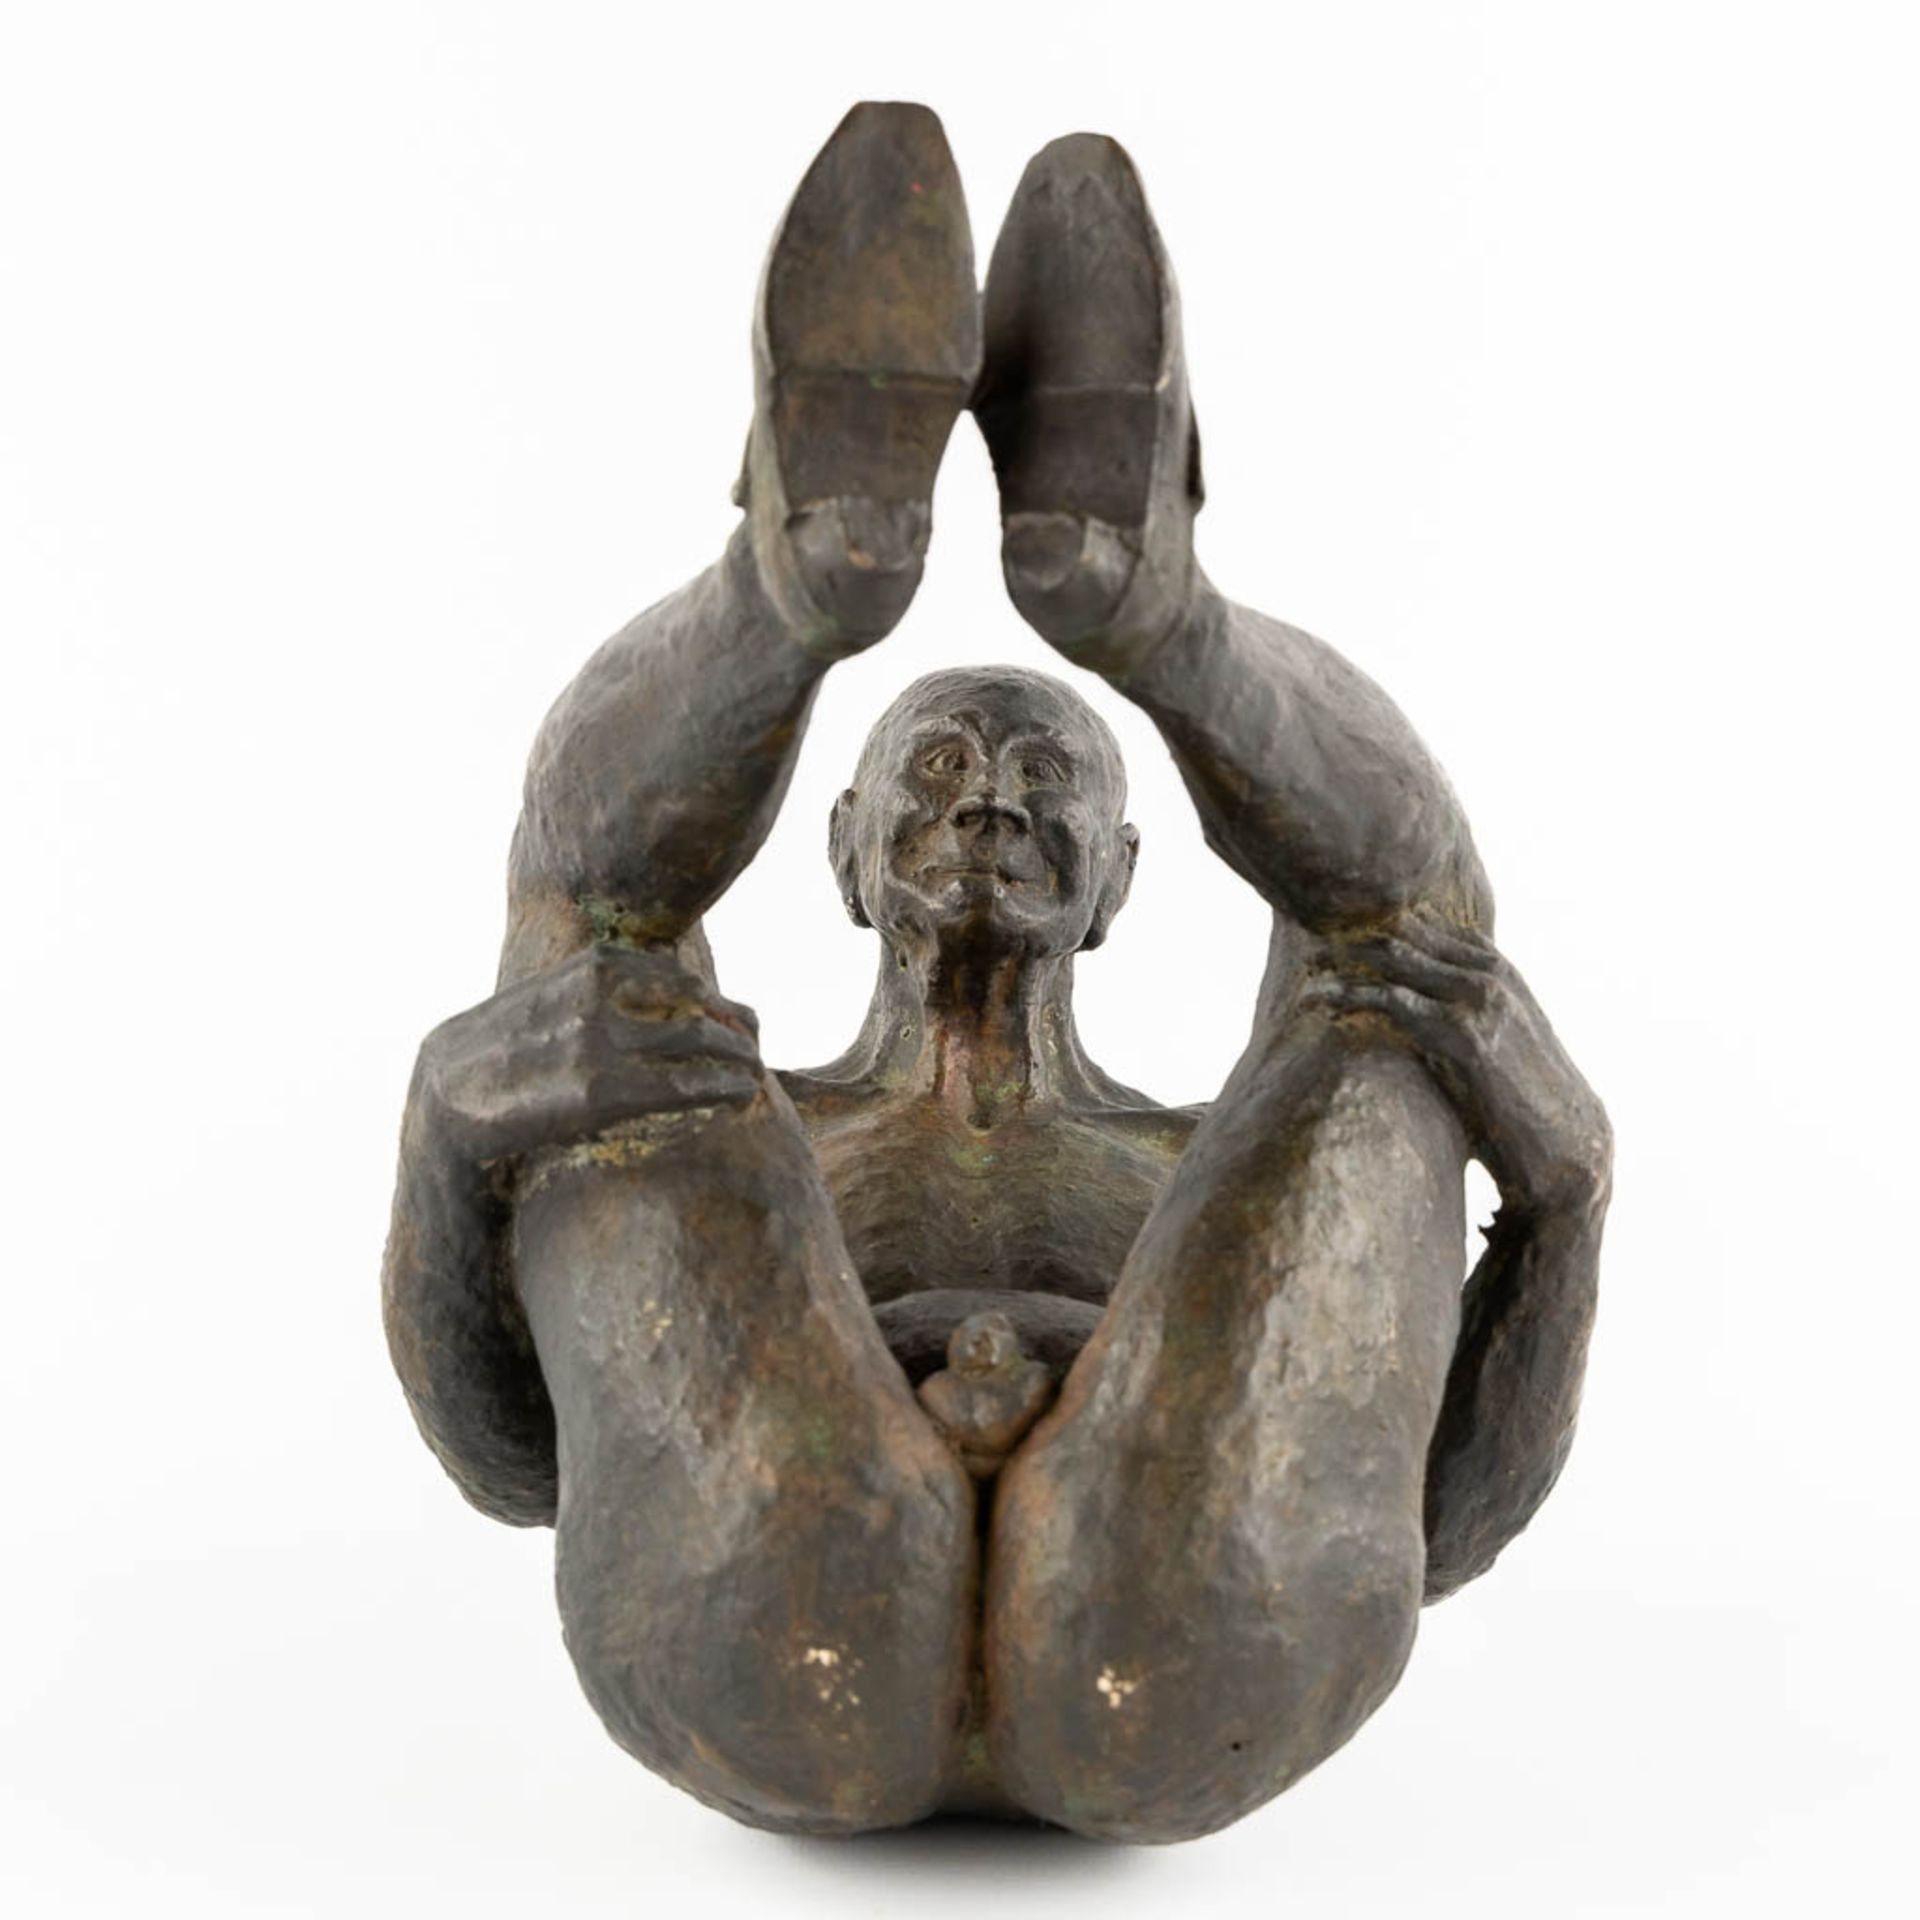 An Exposed Male figure' patinated bronze. (L:22 x W:30 x H:29 cm) - Image 9 of 9